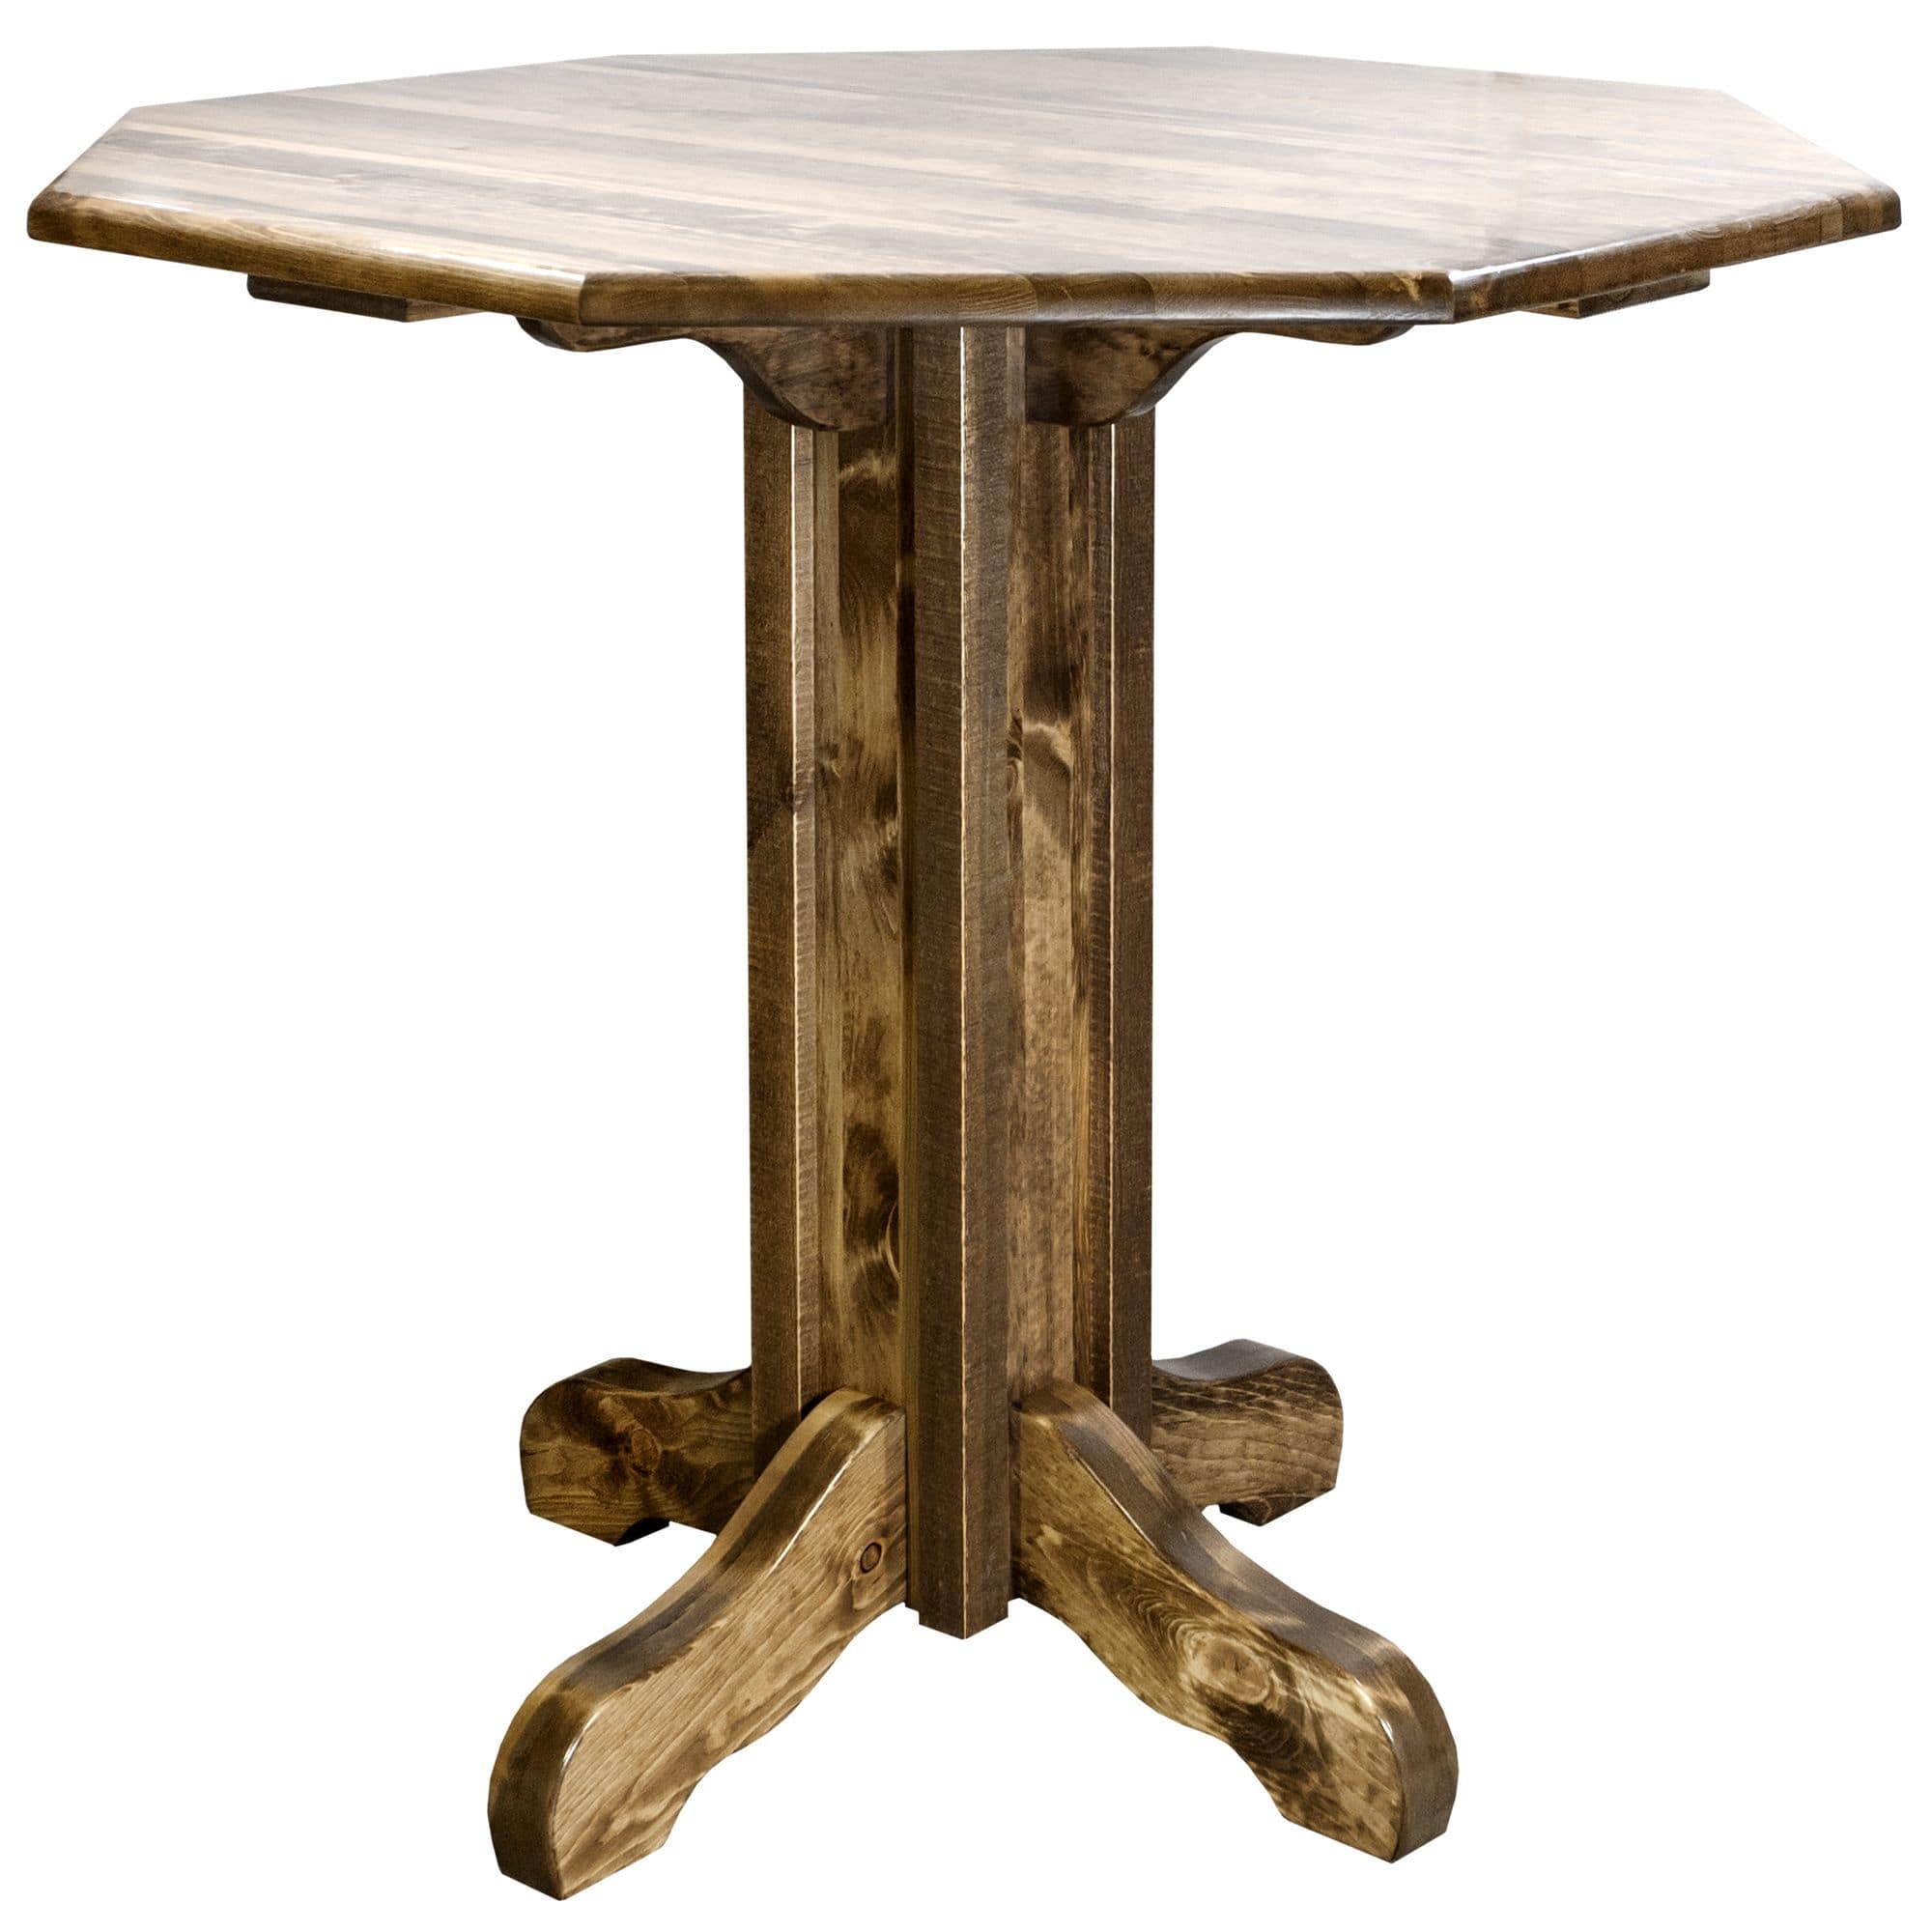 Homestead Collection Pub Table, Stain & Clear Lacquer Finish